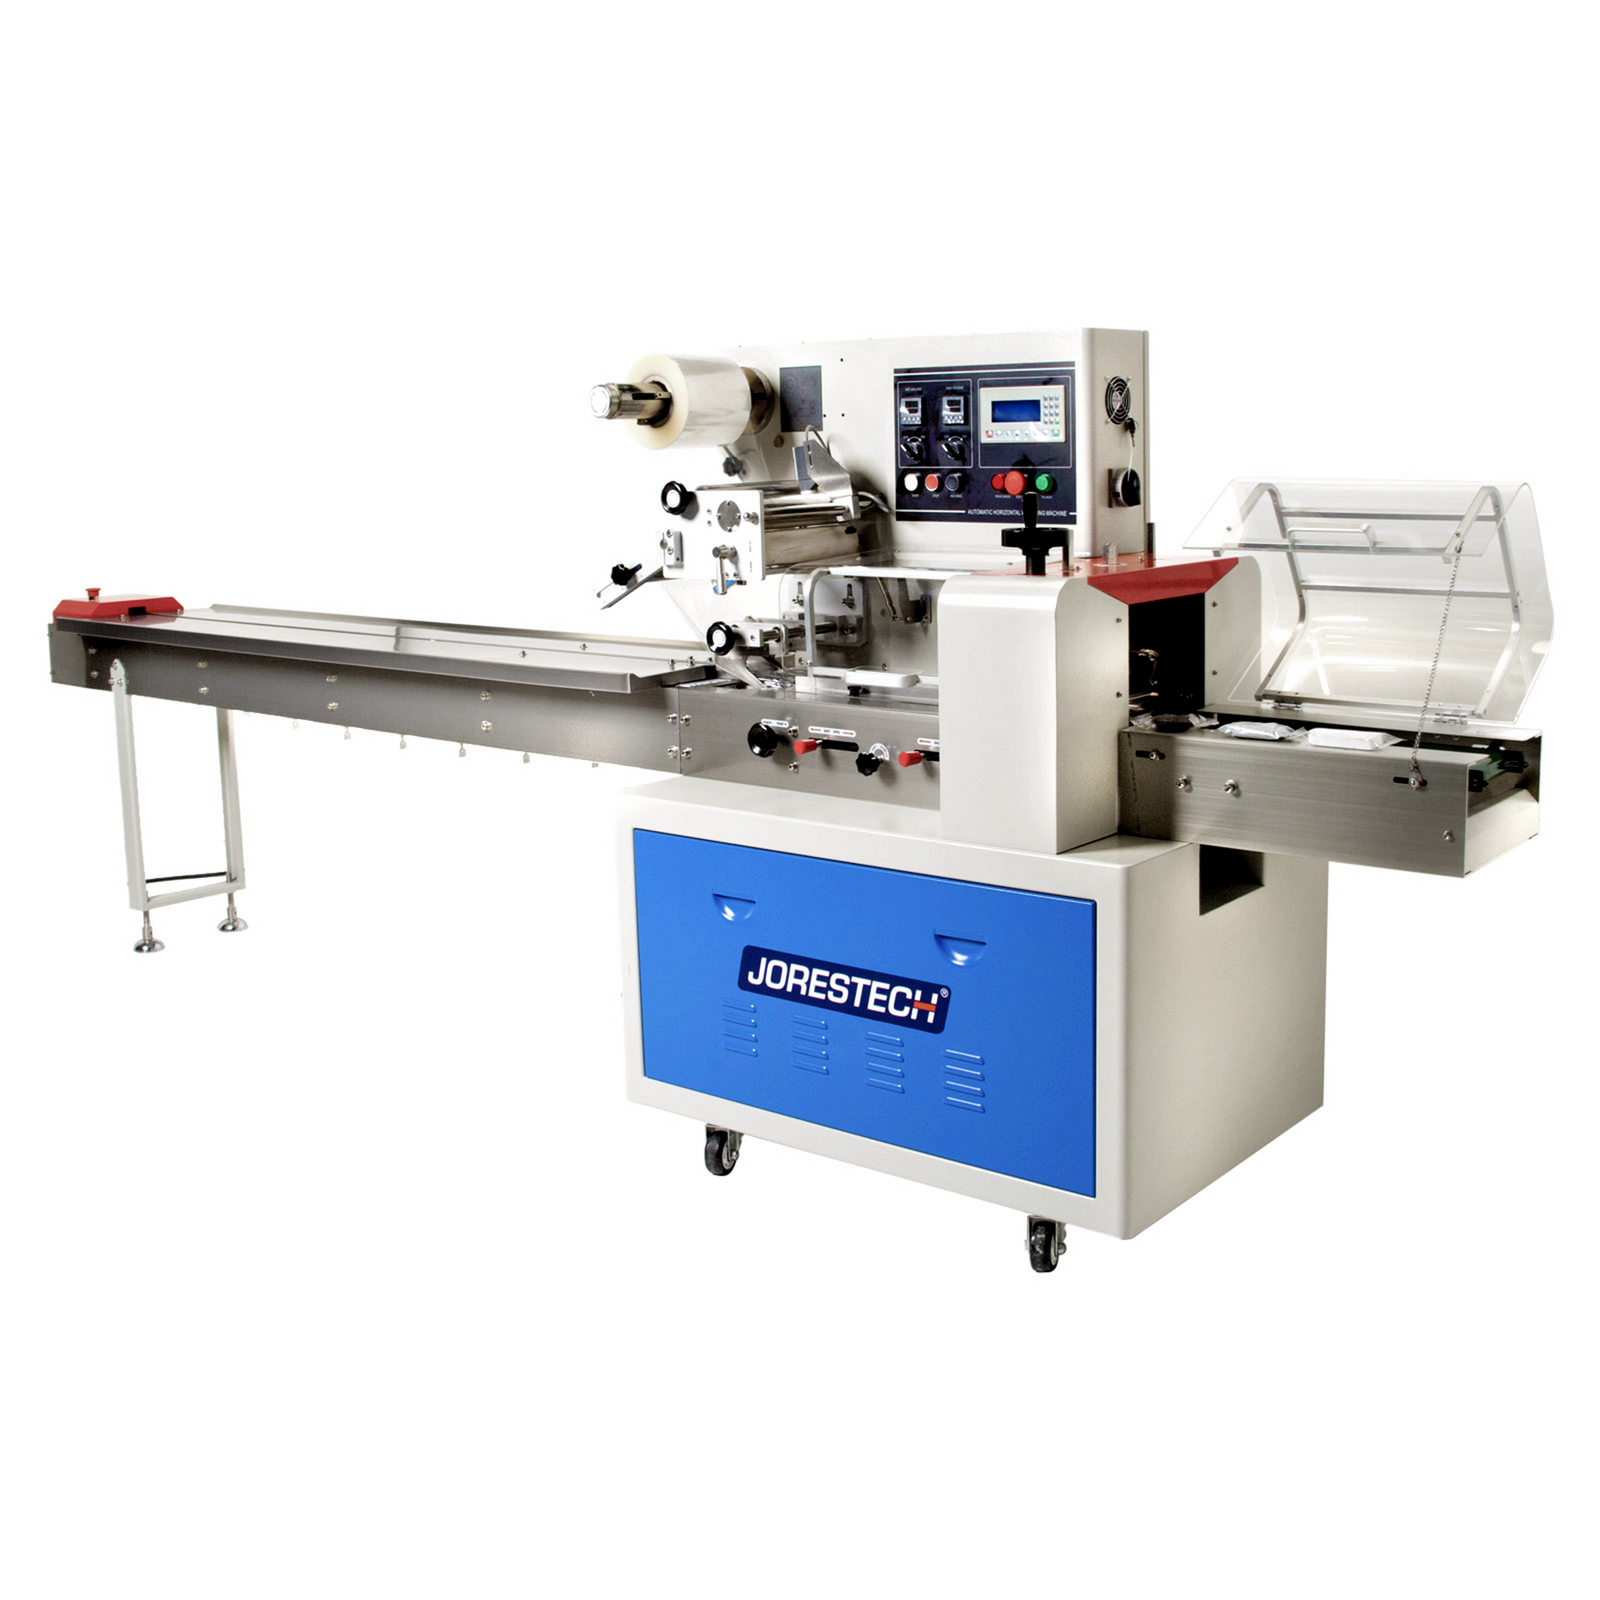 Wire Wrapping Tools, Manual and Automatic Wire Wrap Equipment